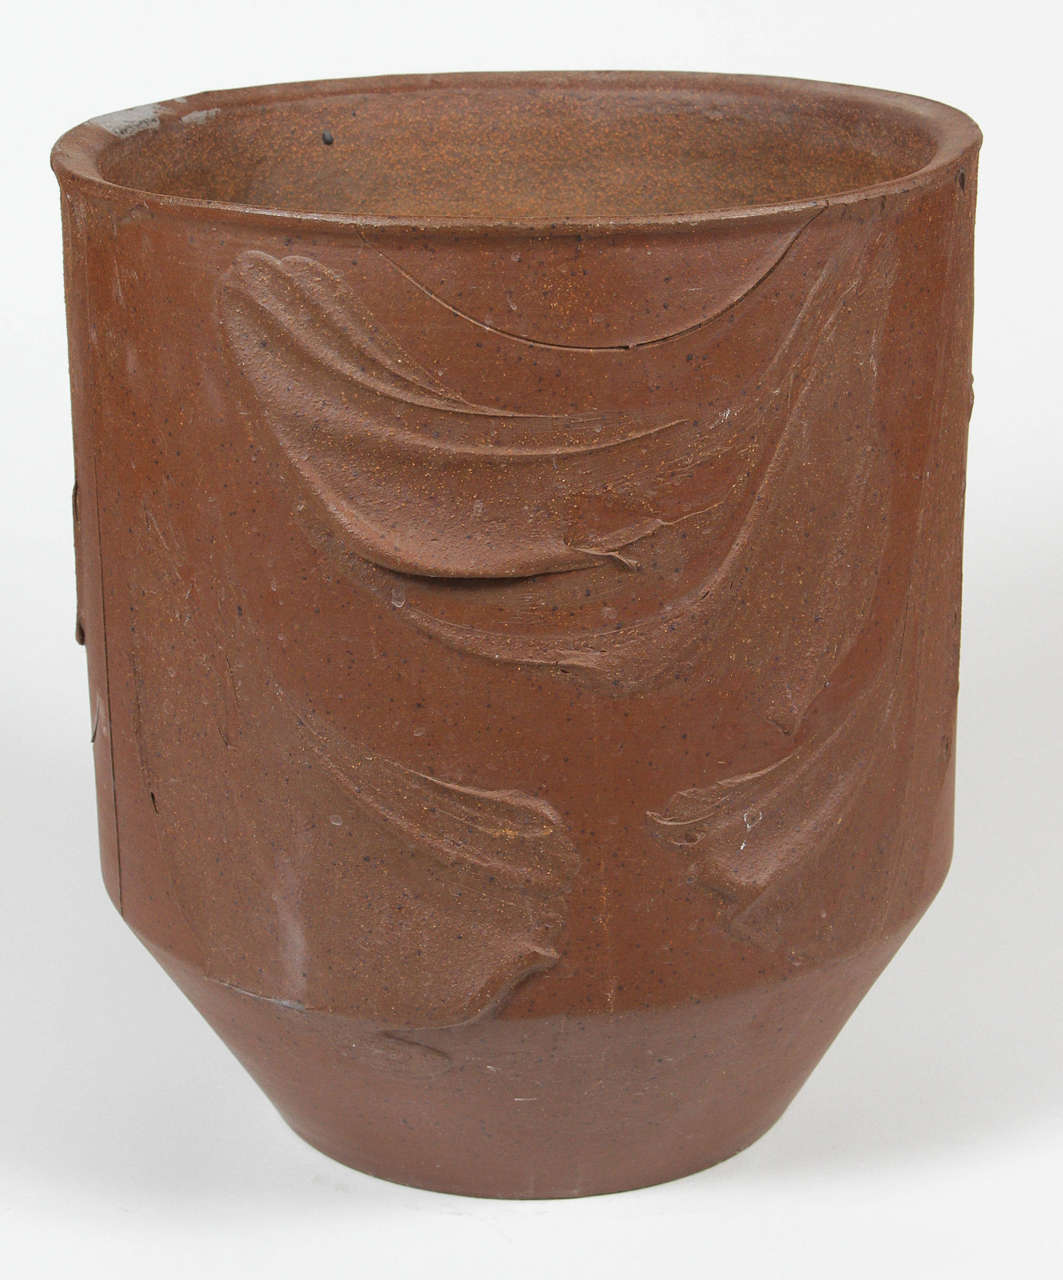 David Cressey for AP # 5048 Unglazed Planter with Expressive Texture In Good Condition For Sale In Los Angeles, CA